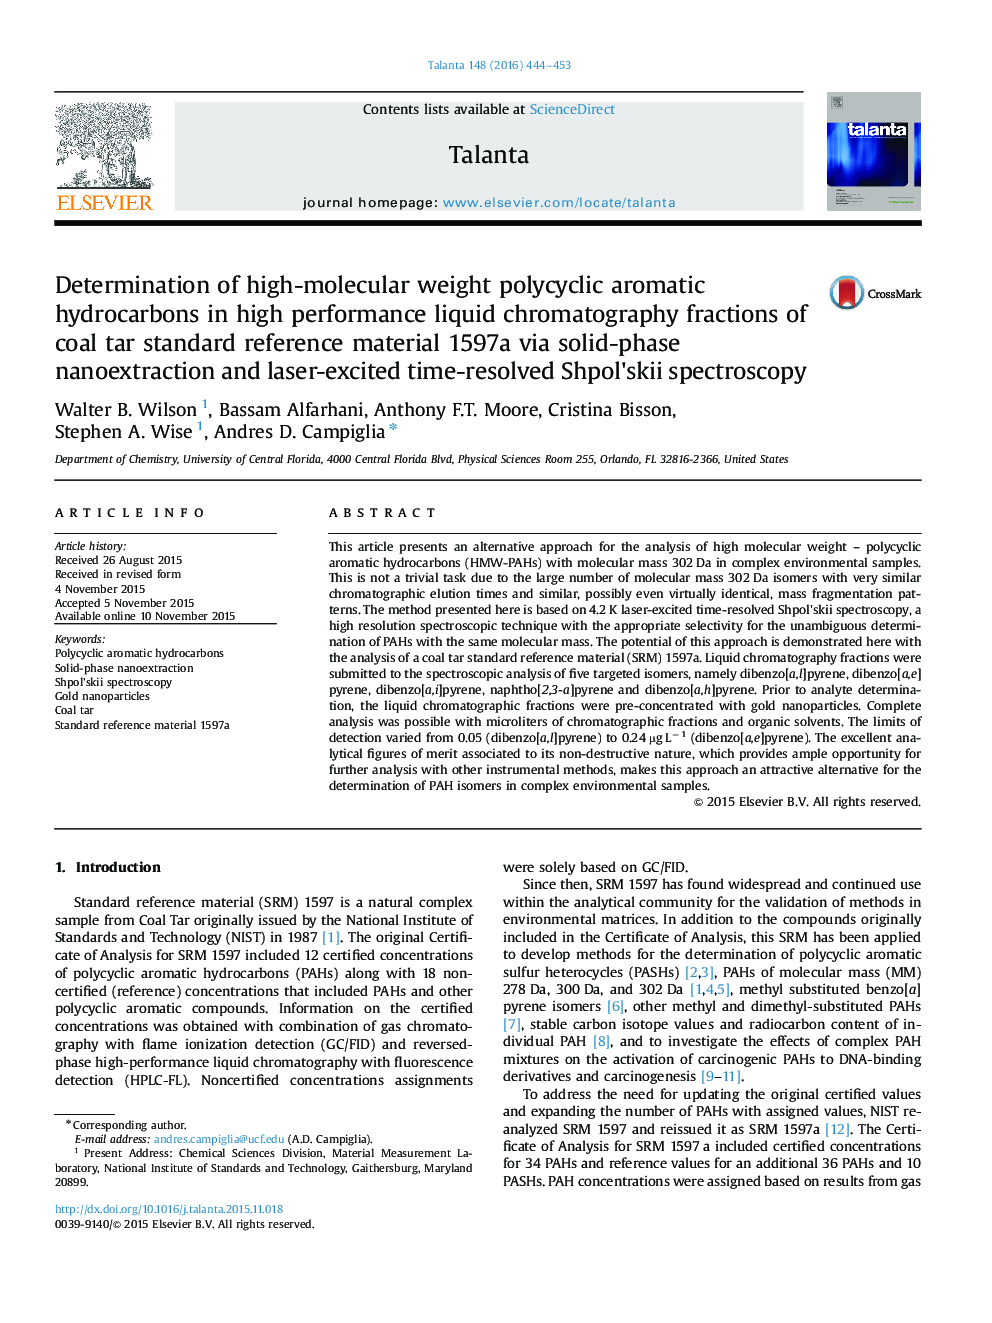 Determination of high-molecular weight polycyclic aromatic hydrocarbons in high performance liquid chromatography fractions of coal tar standard reference material 1597a via solid-phase nanoextraction and laser-excited time-resolved Shpol'skii spectroscop